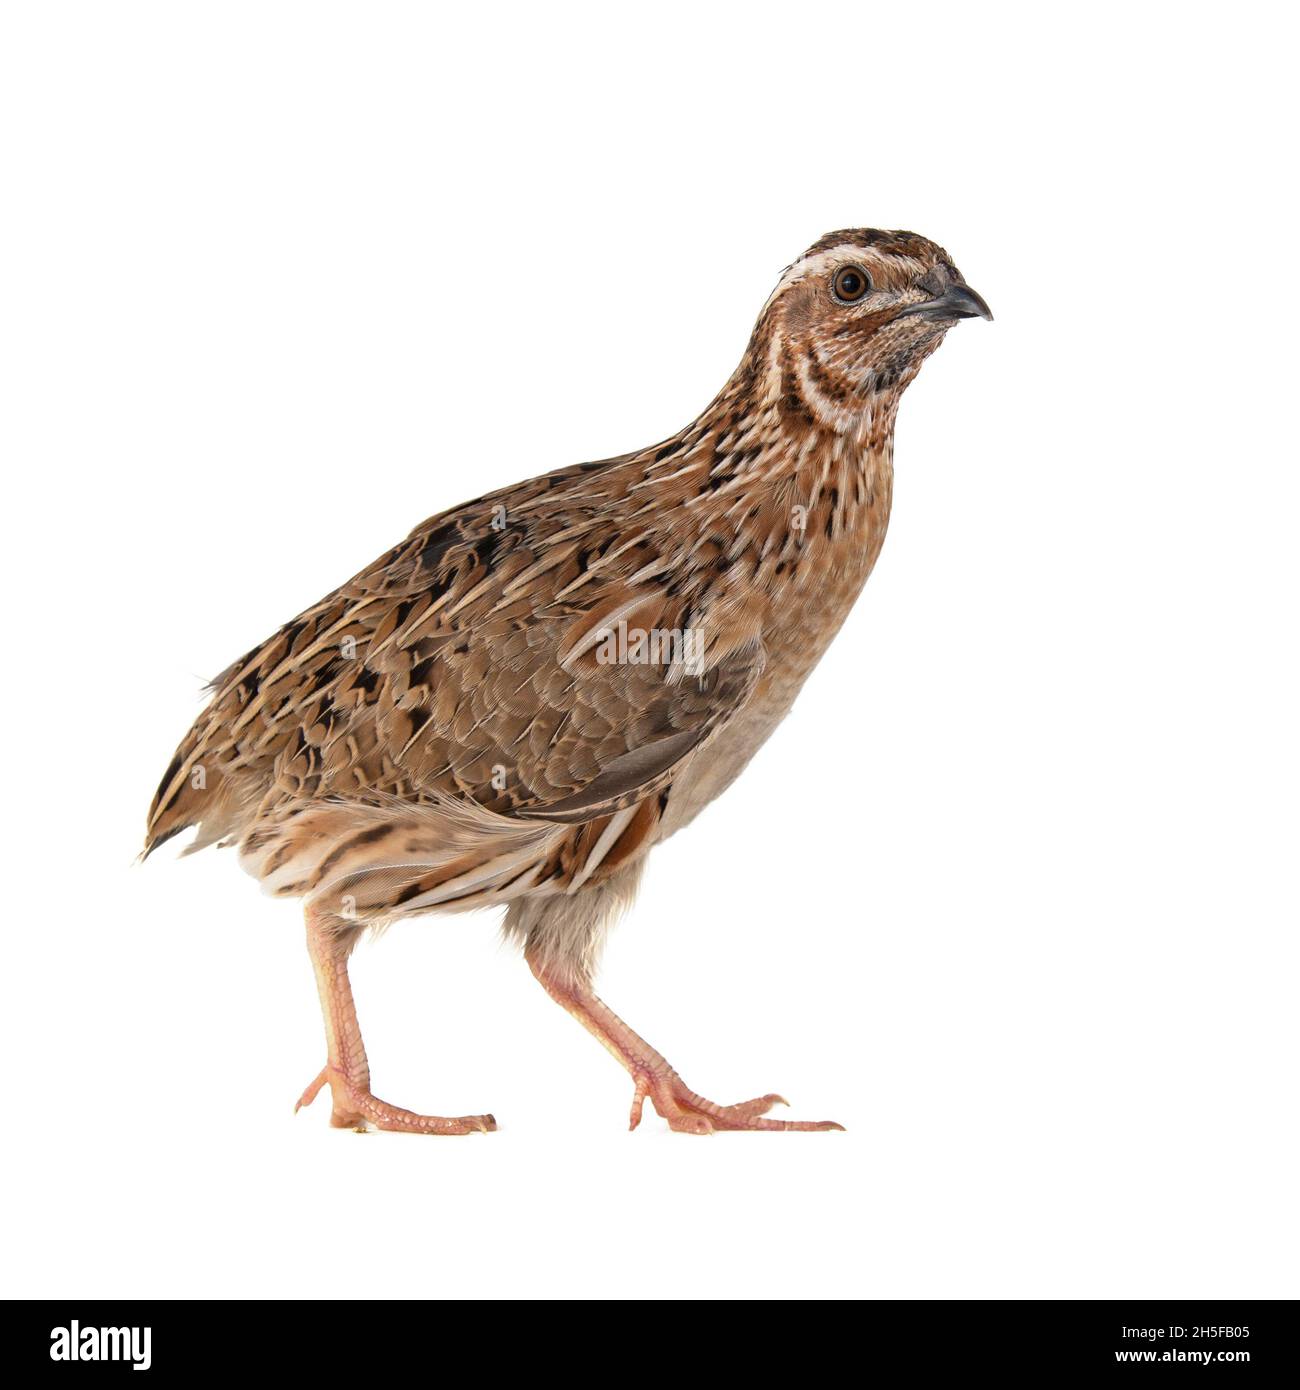 Wild quail, Coturnix coturnix, isolated on a white background. Stock Photo